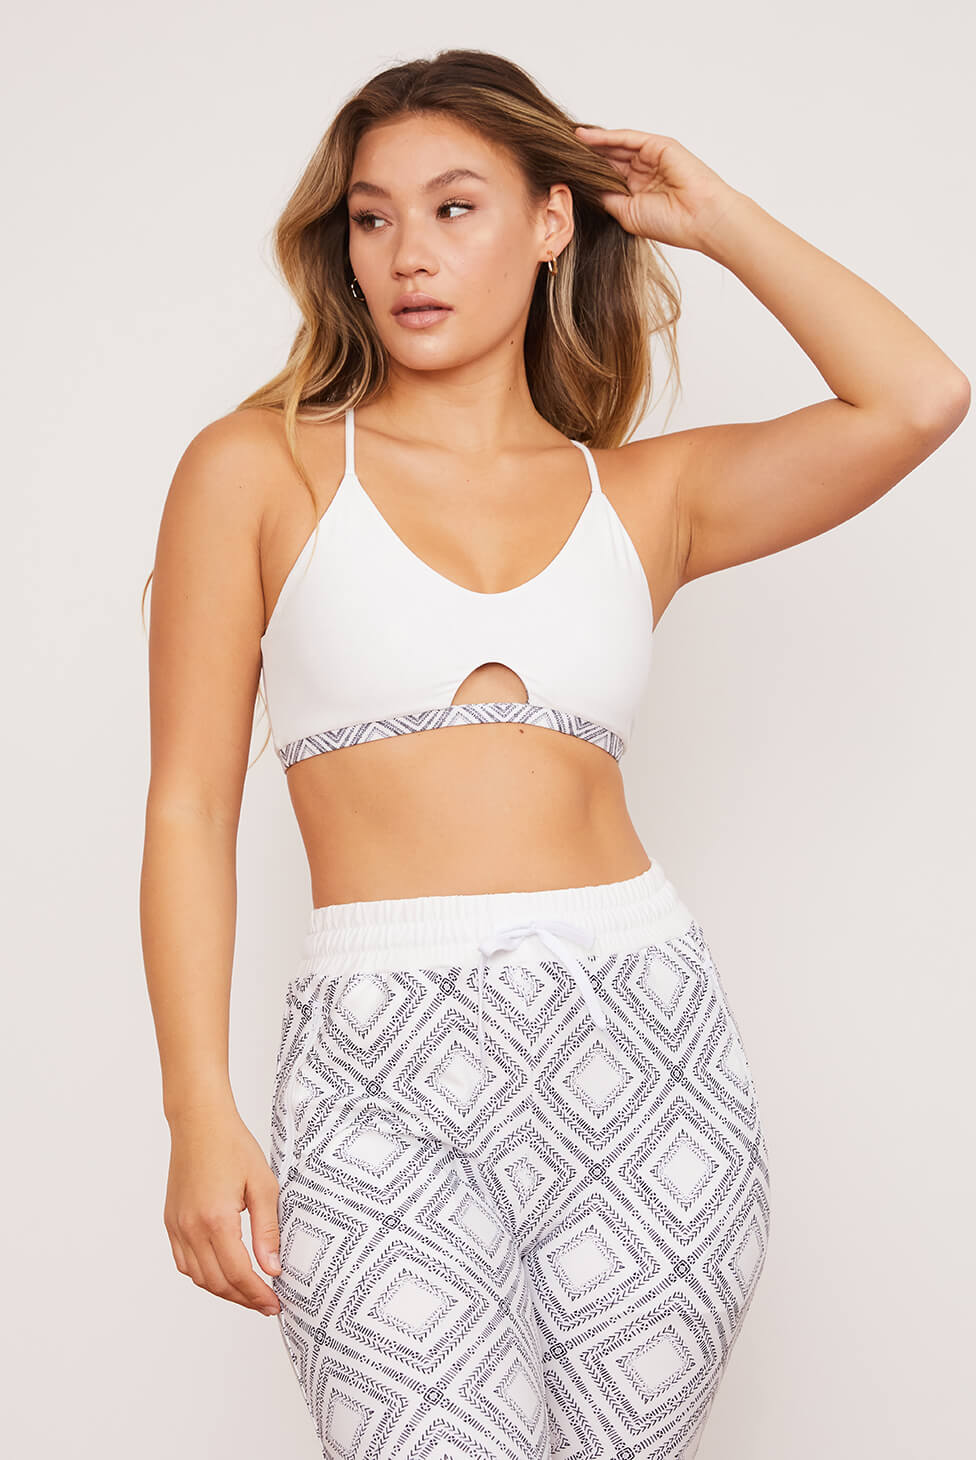 Out From Under Juniper Cutout One Shoulder Bra Top